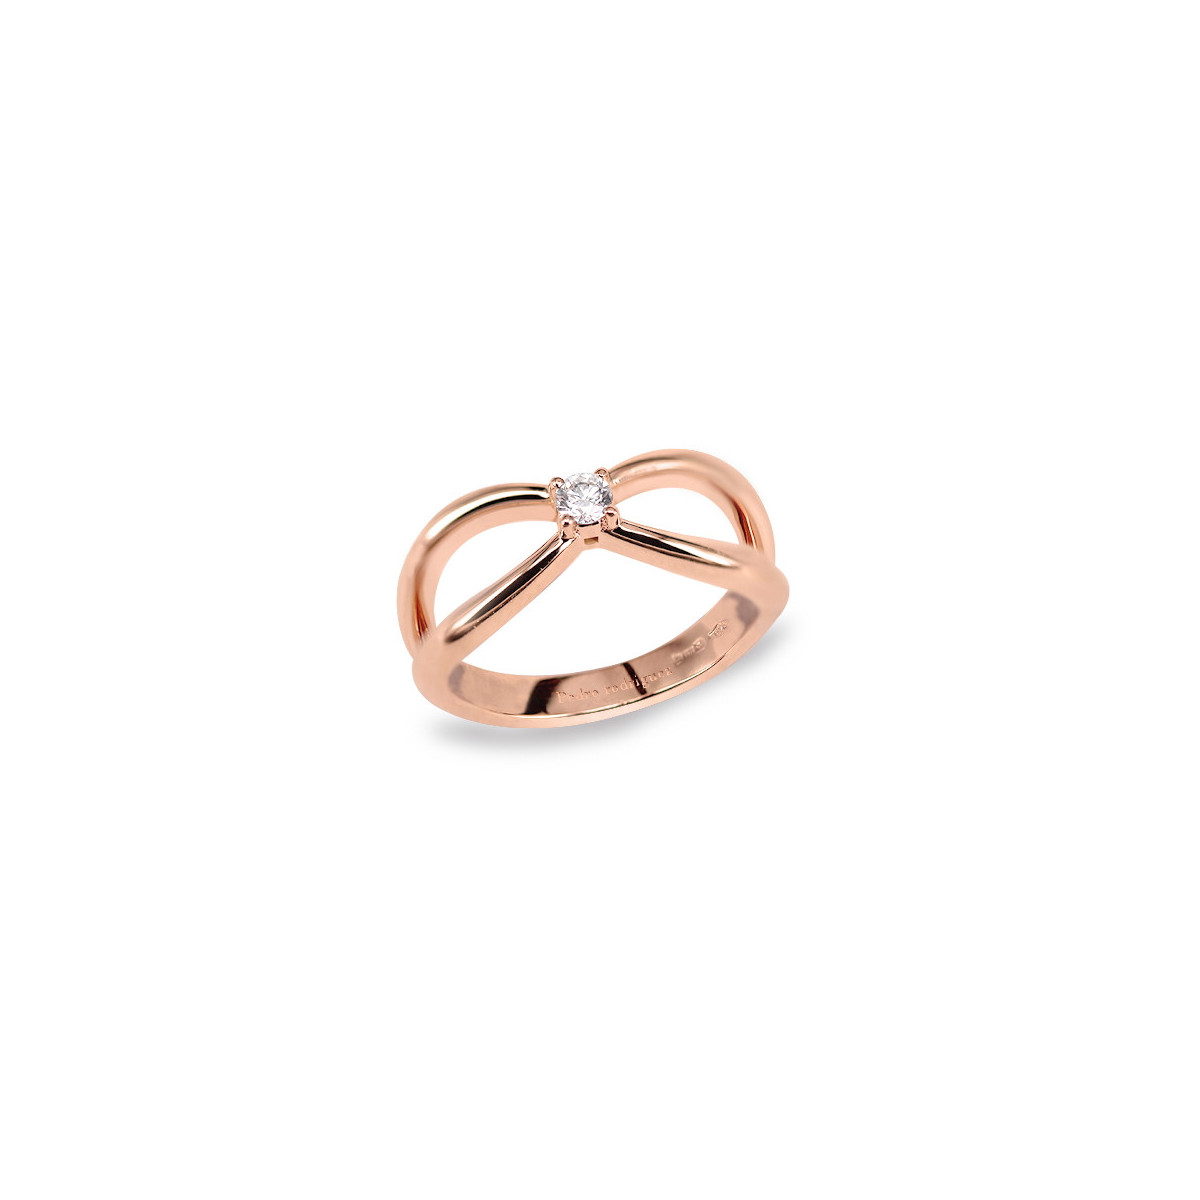 ROSE GOLD SOLITARY RING